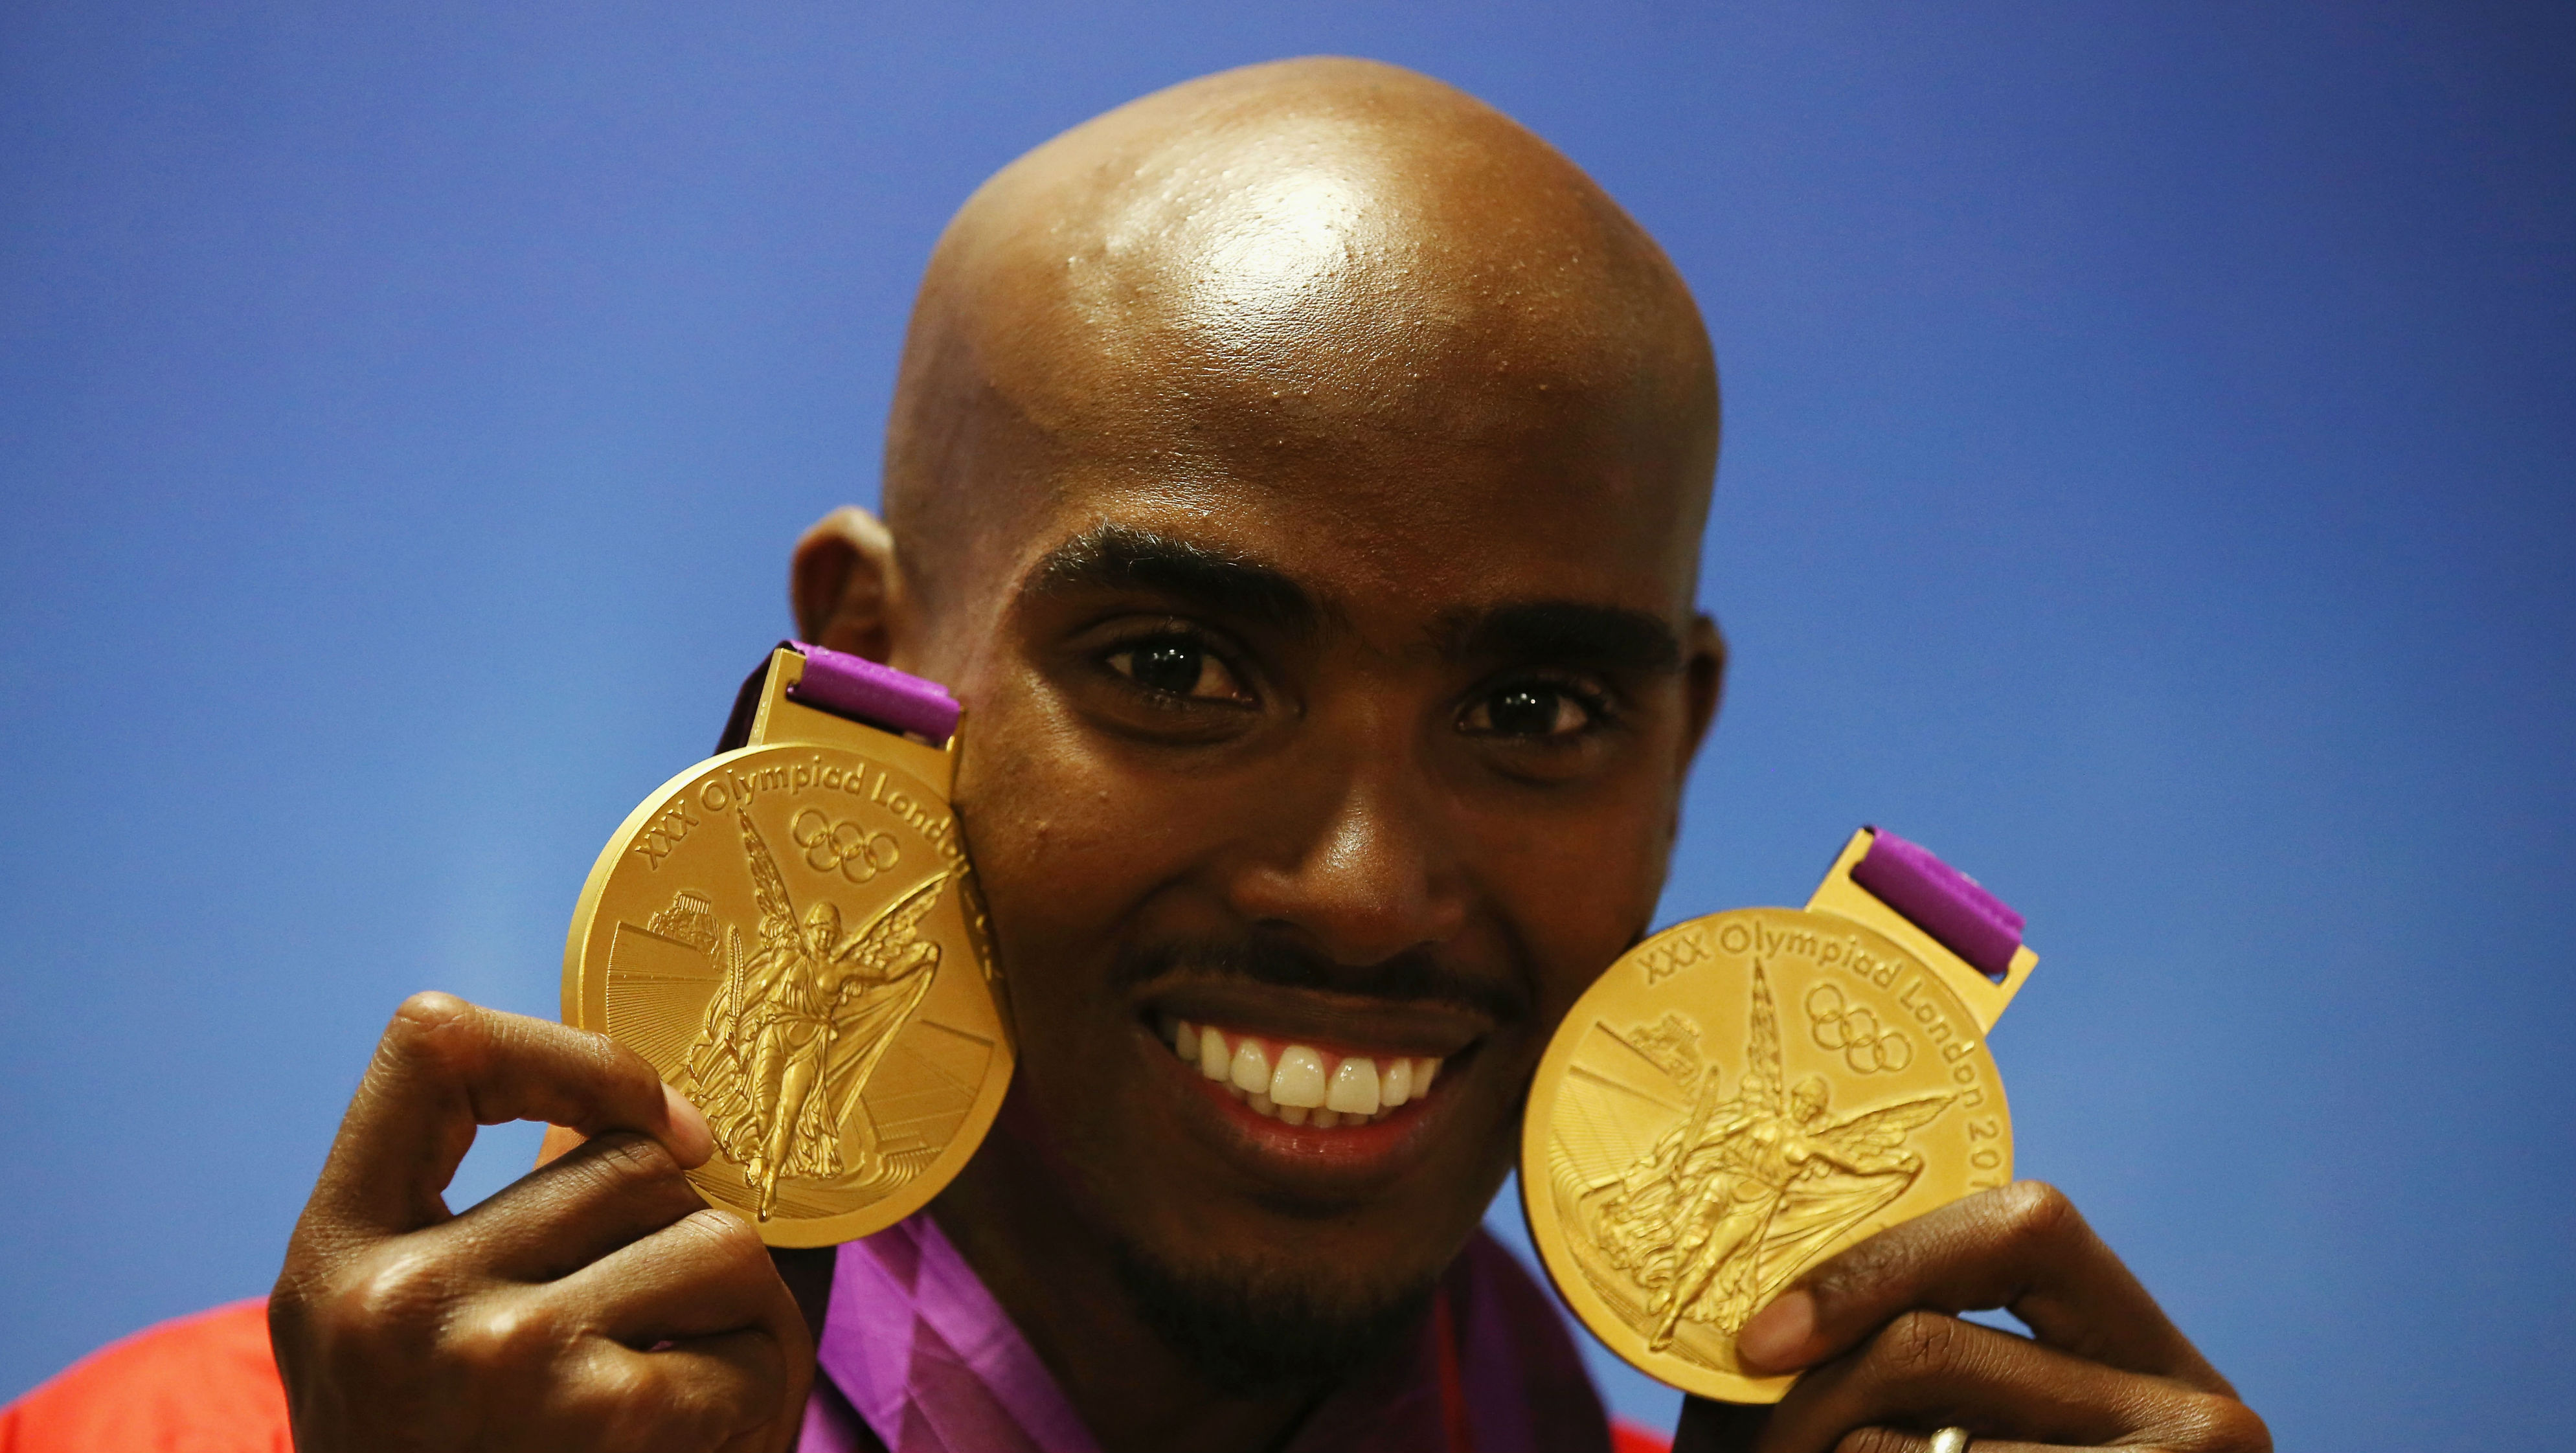 Gold medalist Mohamed Farah of Great Britain poses with his medals for the 10,000m and 5000m